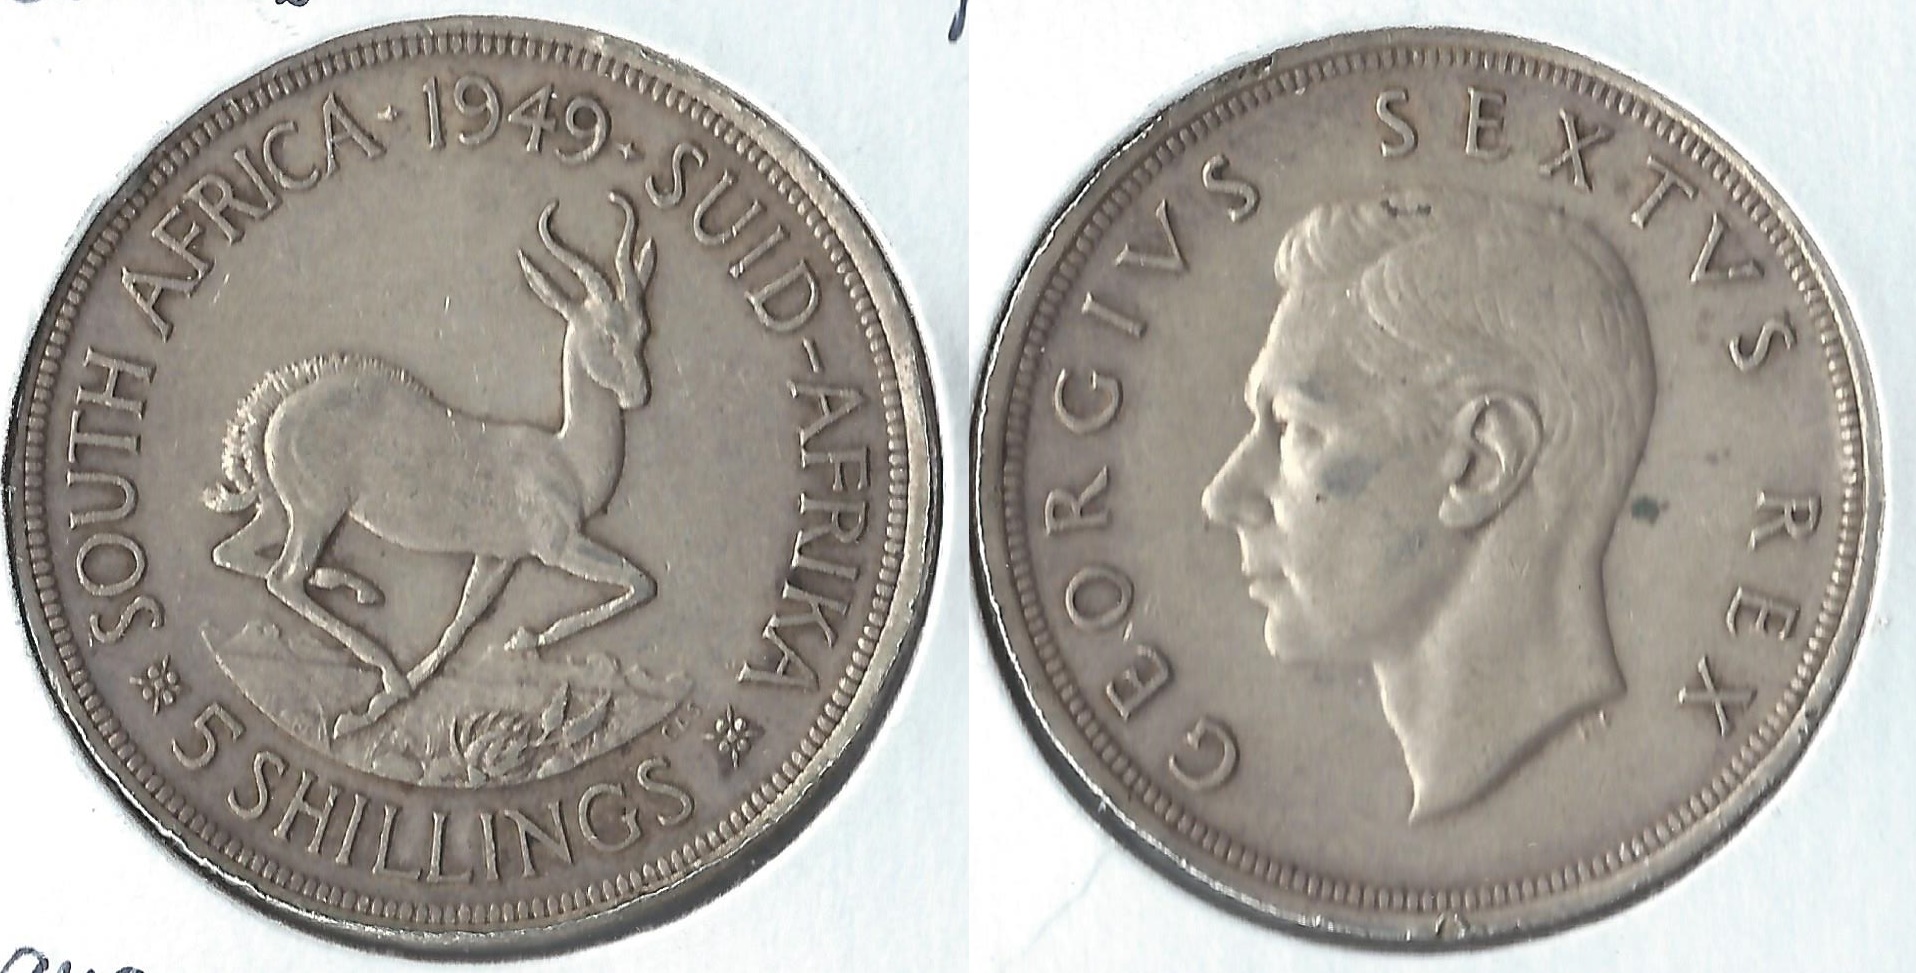 1949 south africa five shillings.jpg